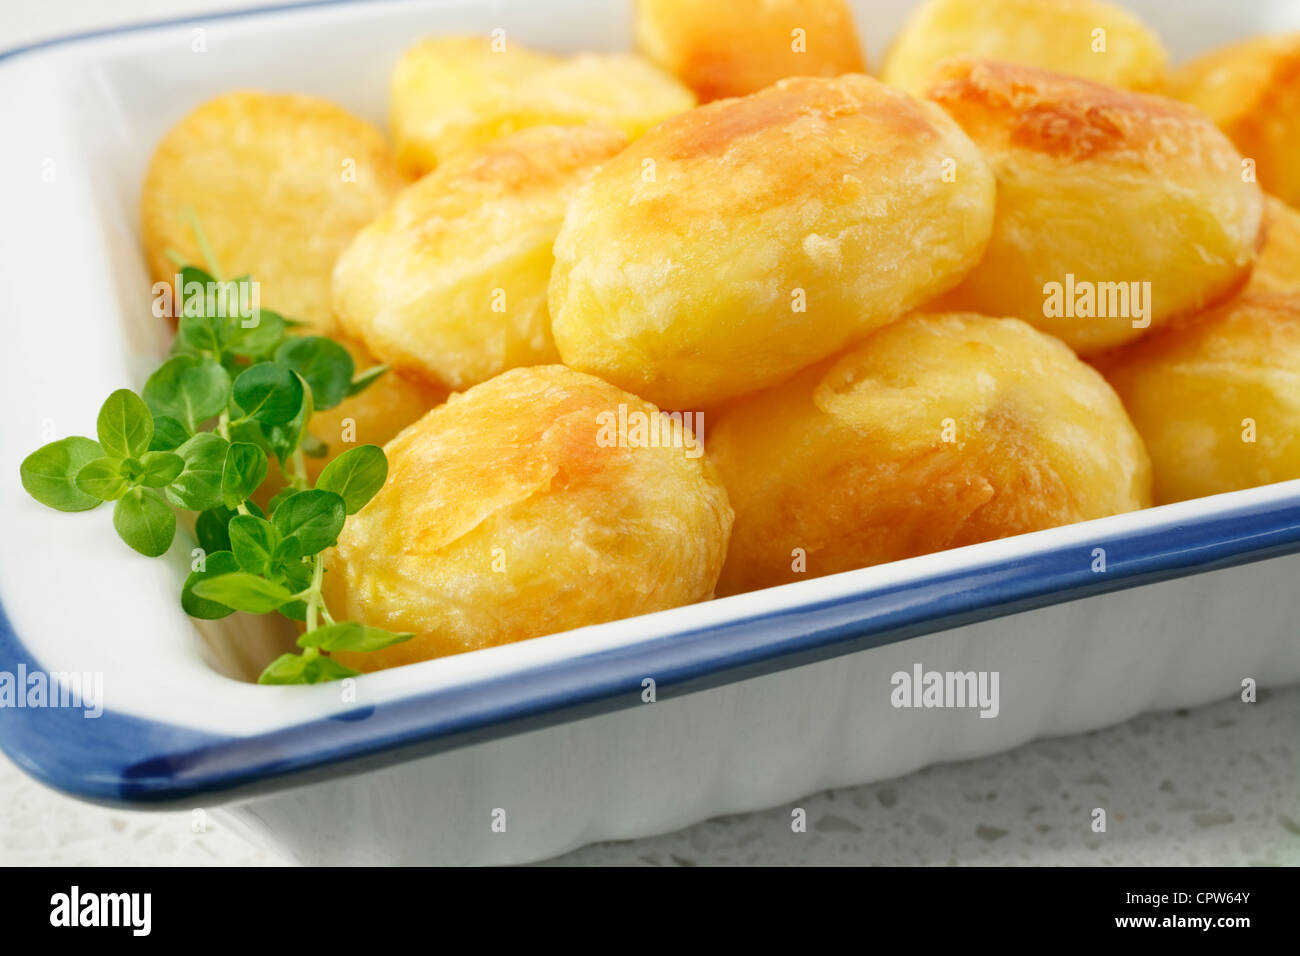 Crunchy, golden roast potatoes, garnished with thyme, ready to serve. Stock Photo